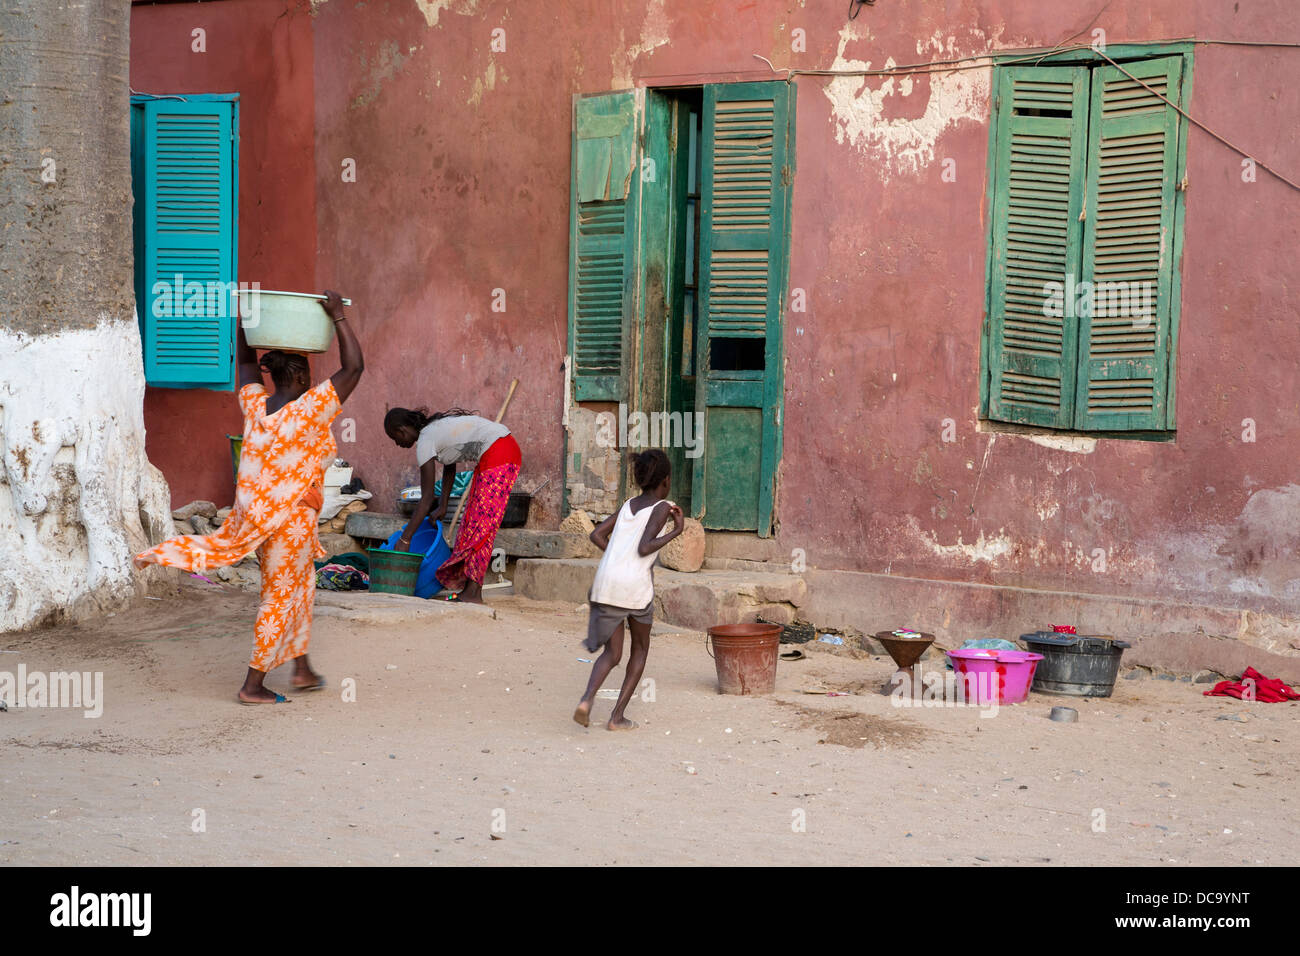 Woman Carrying Water into House, Goree Island, Senegal. Stock Photo